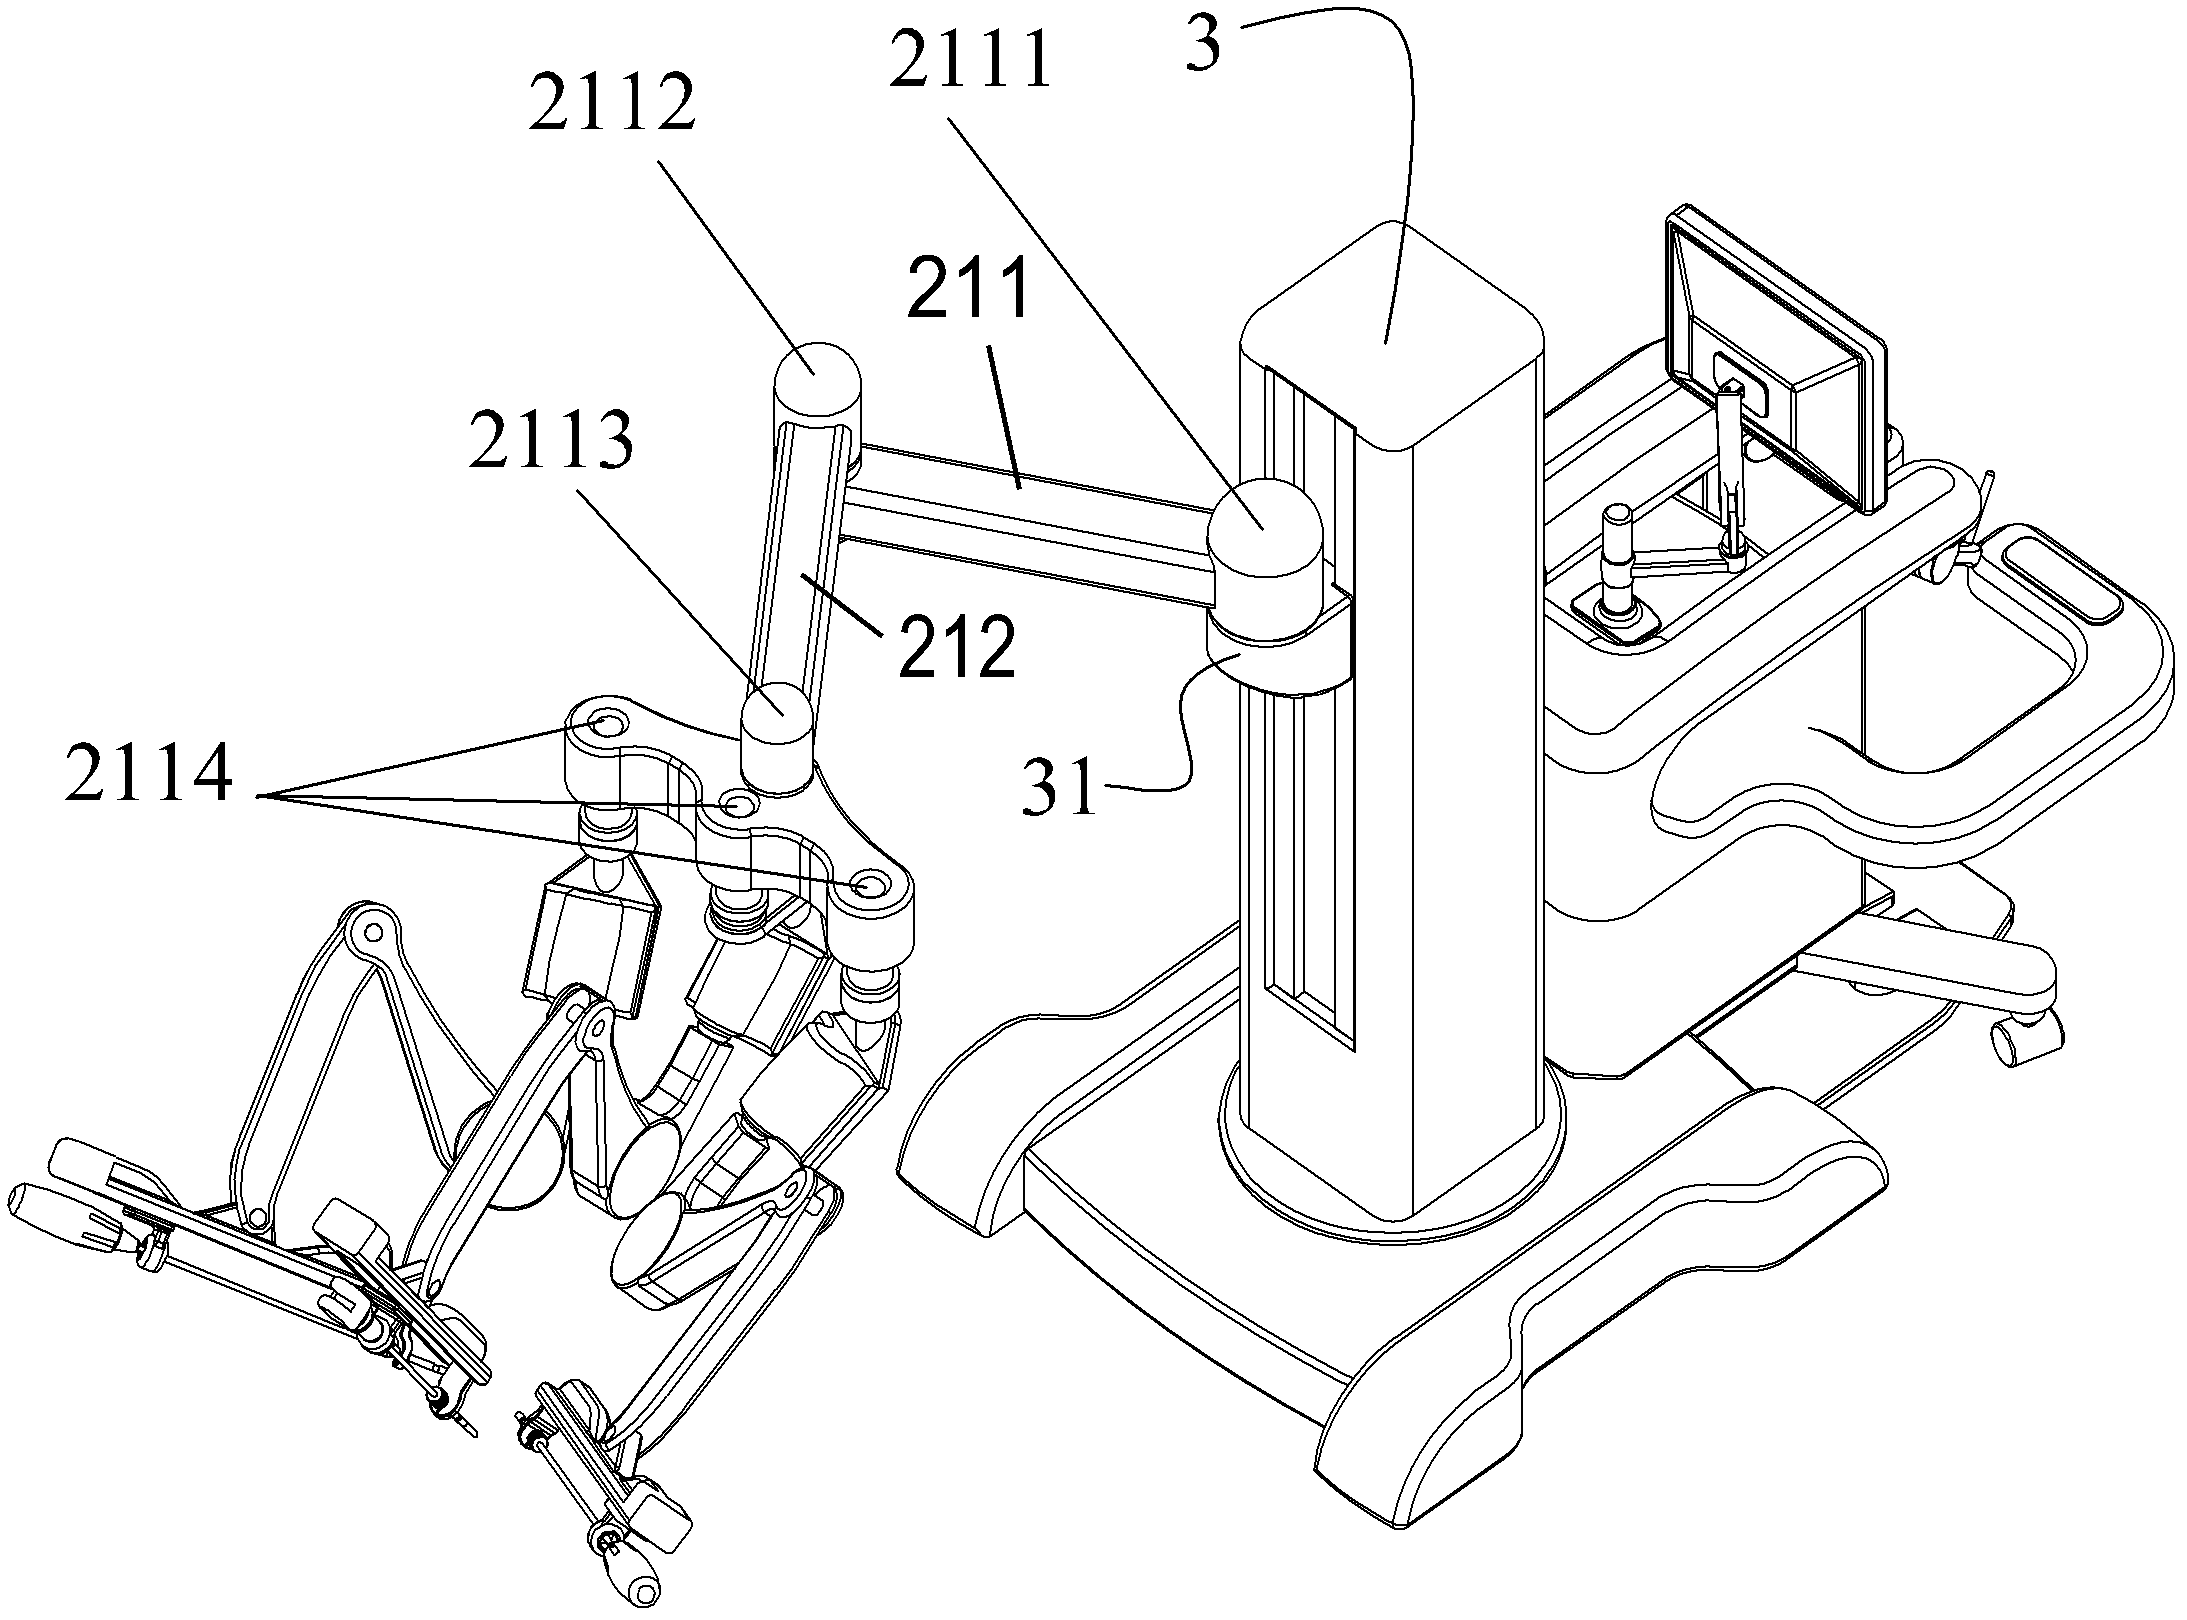 Arrangement structure for mechanical arm of minimally invasive surgery robot